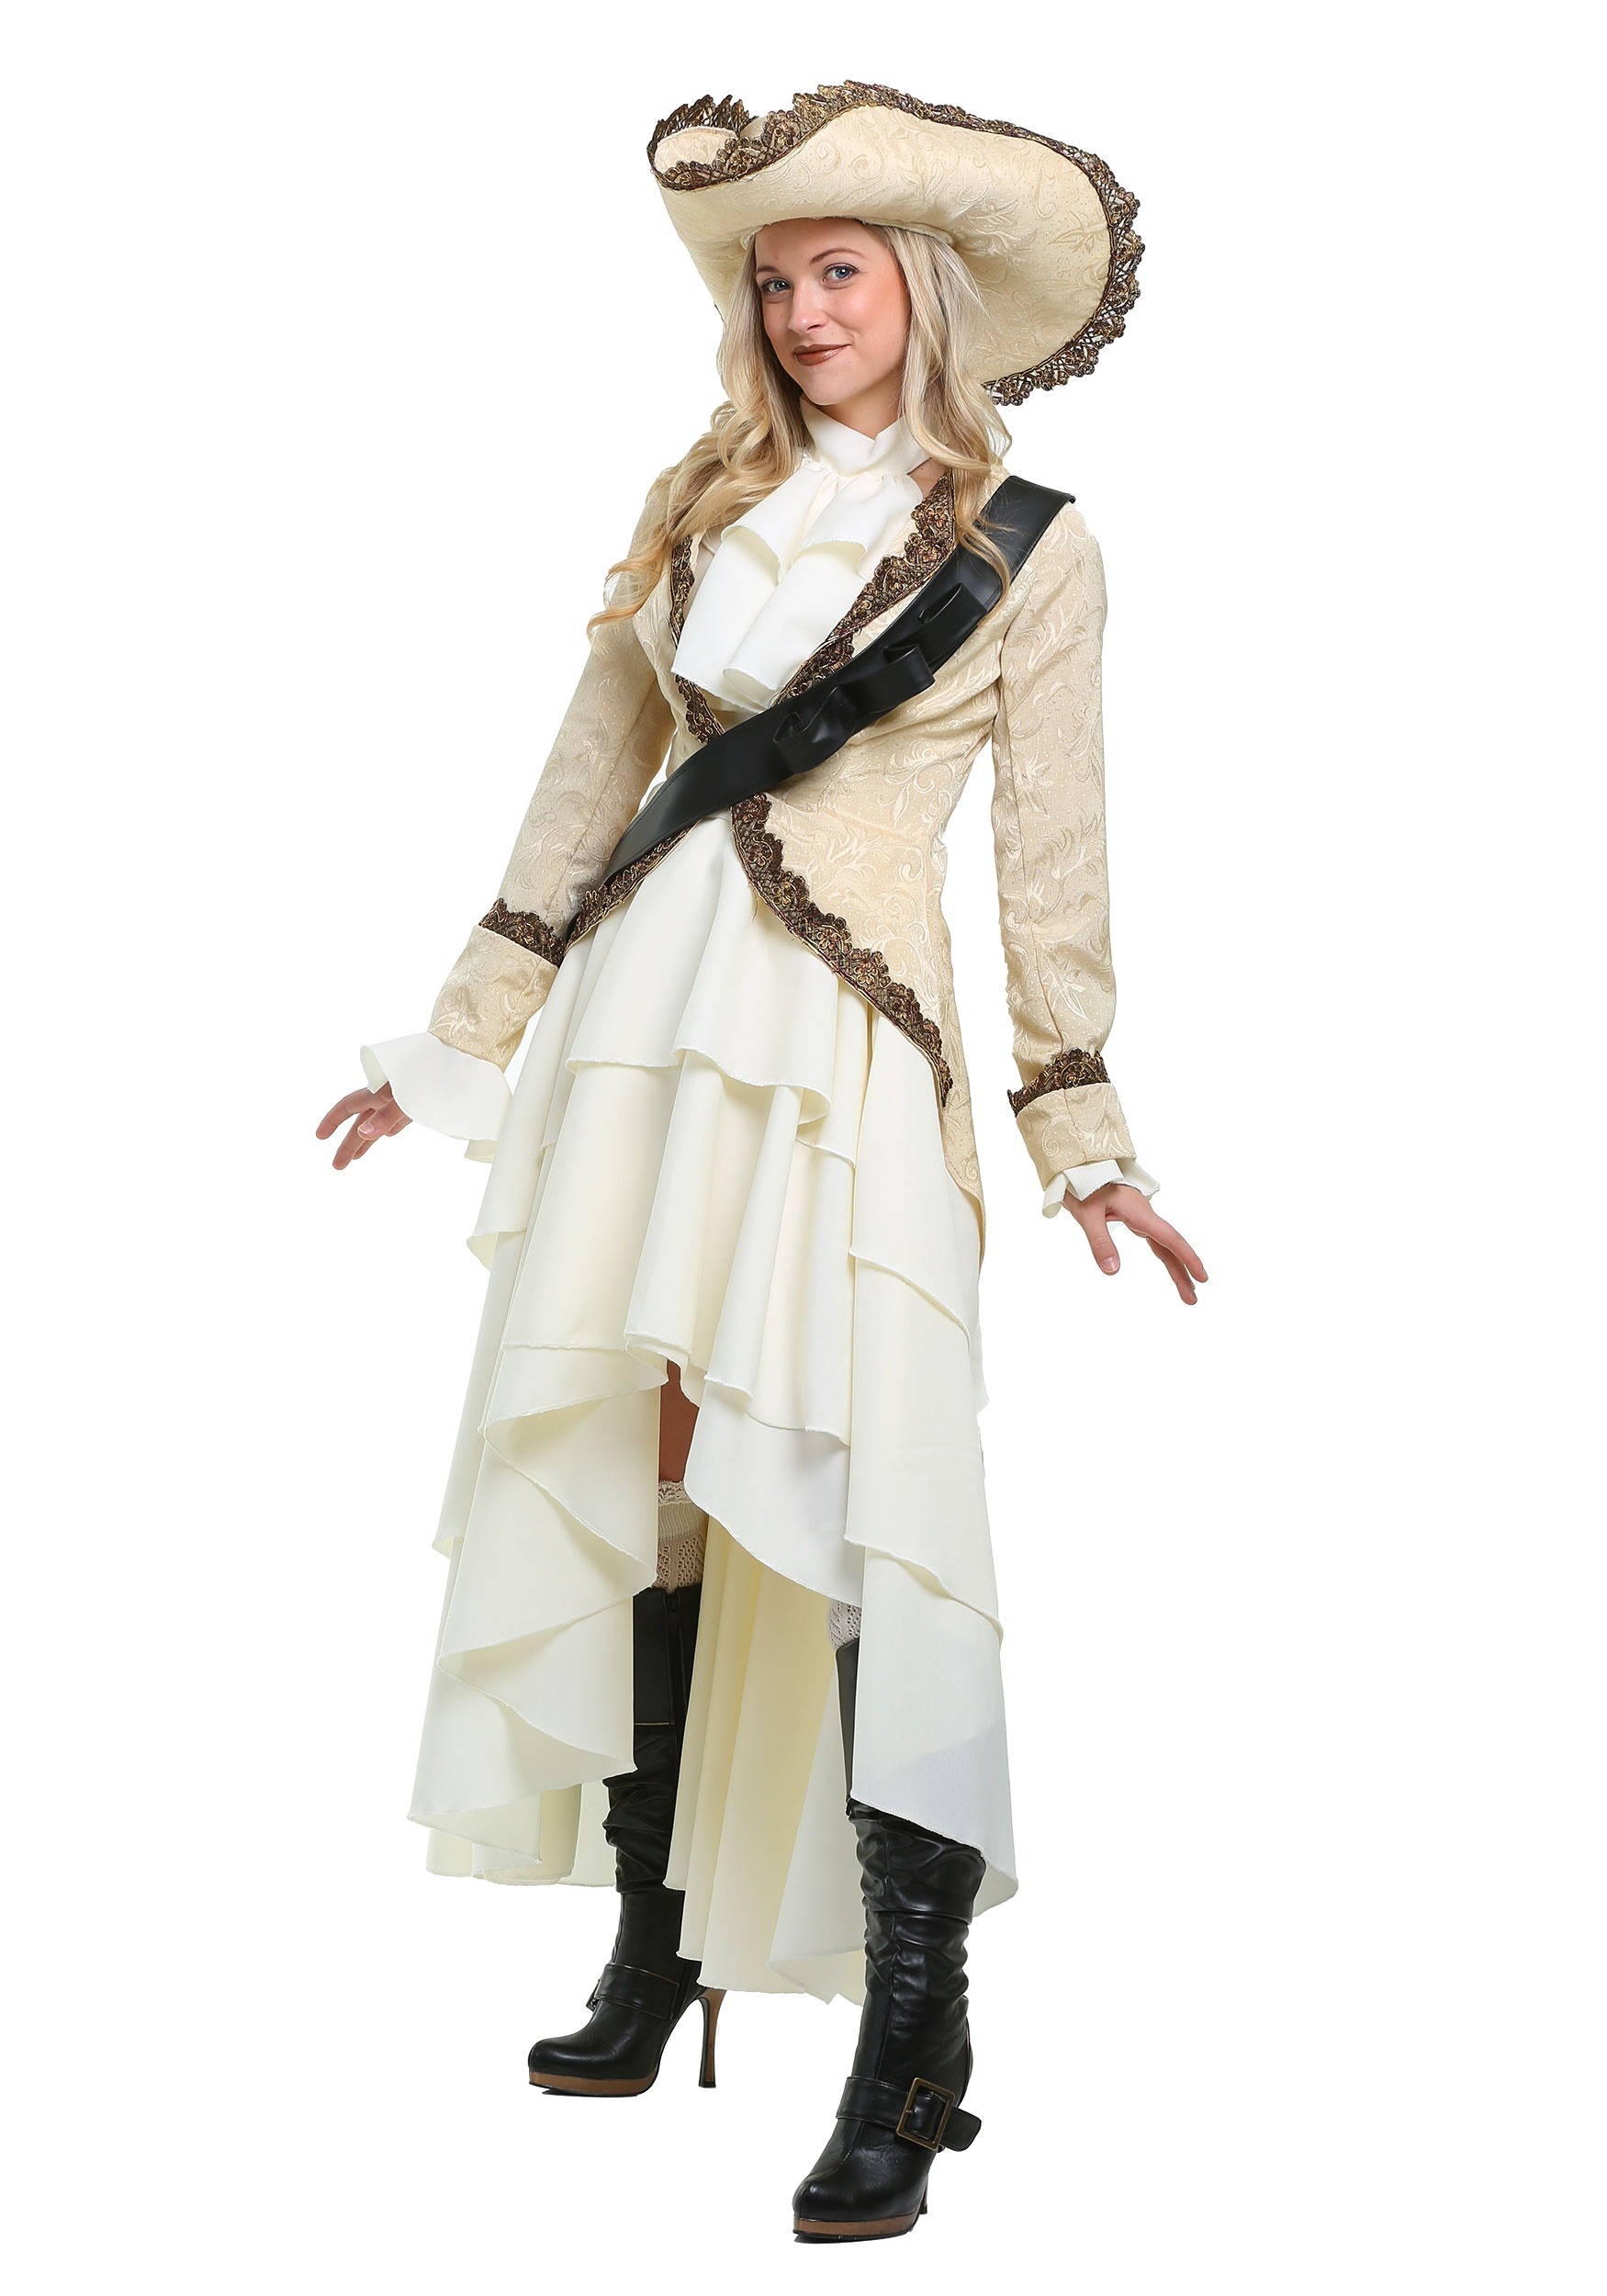 Captivating Pirate Fancy Dress Costume For Women